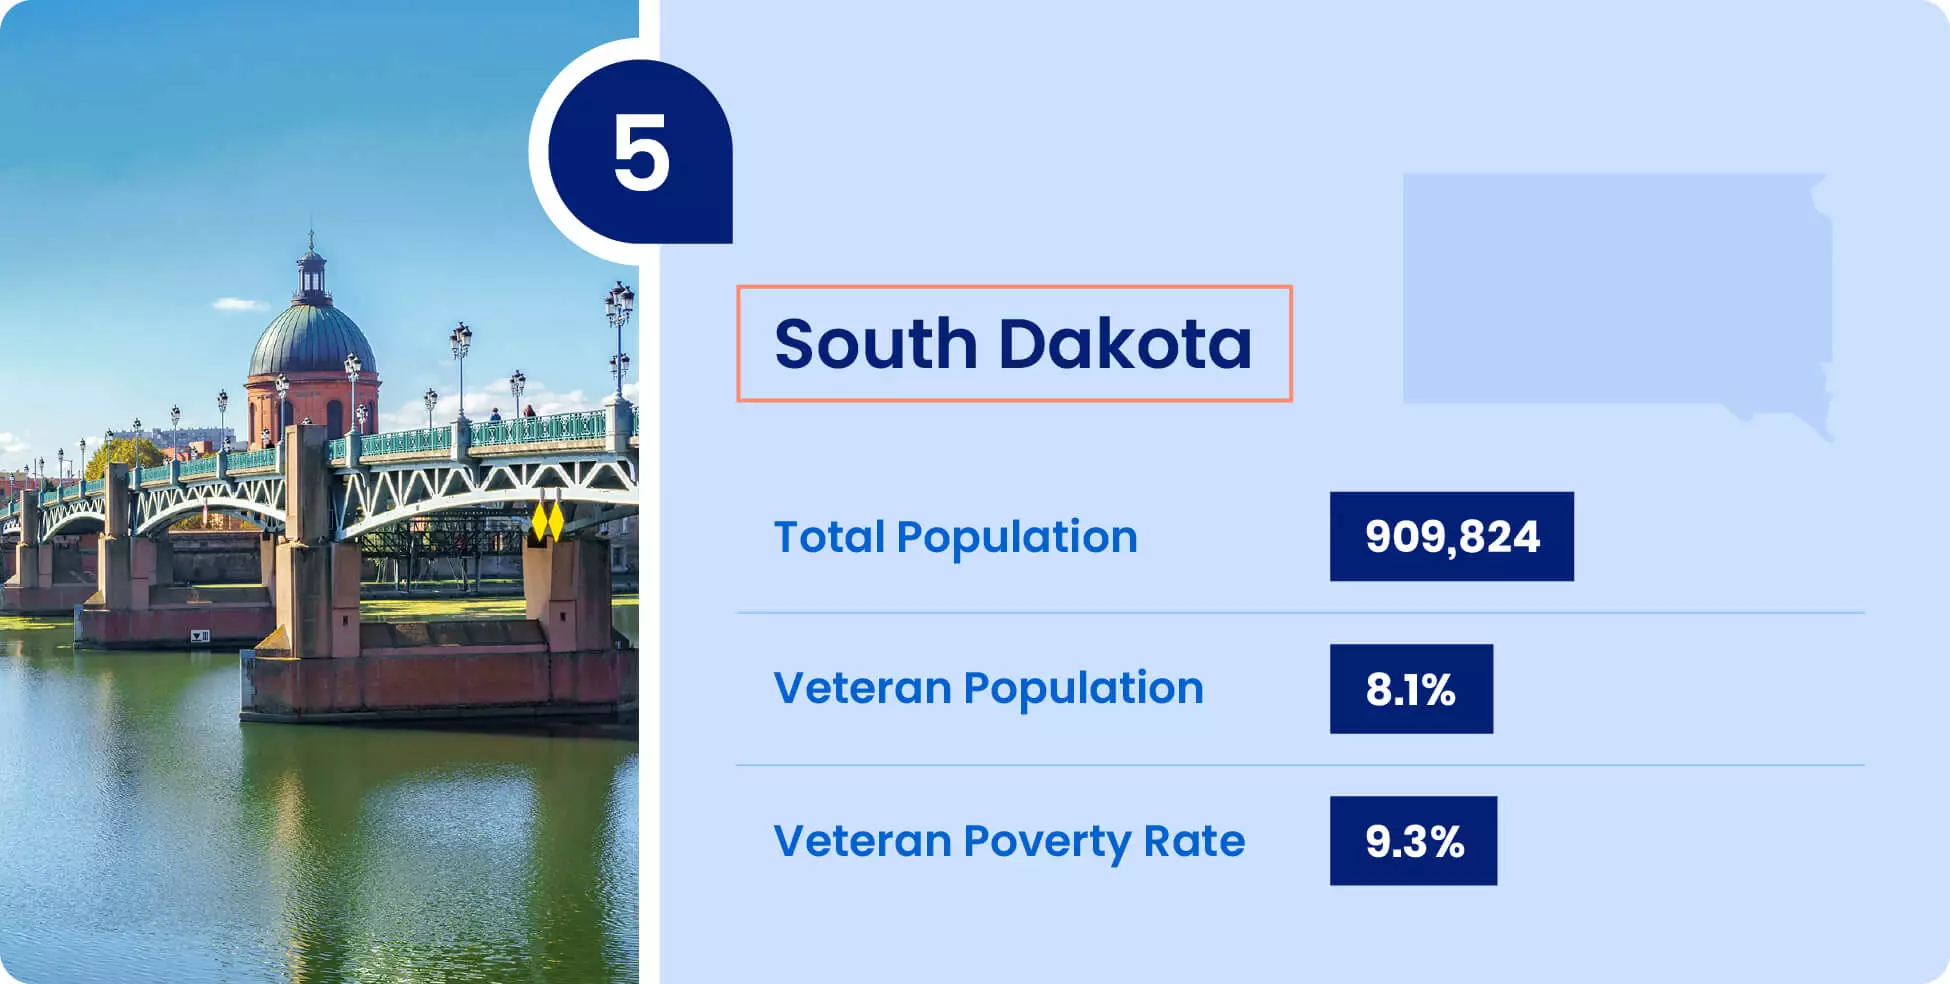 Image shows key information for military retirees thinking of moving to South Dakota.